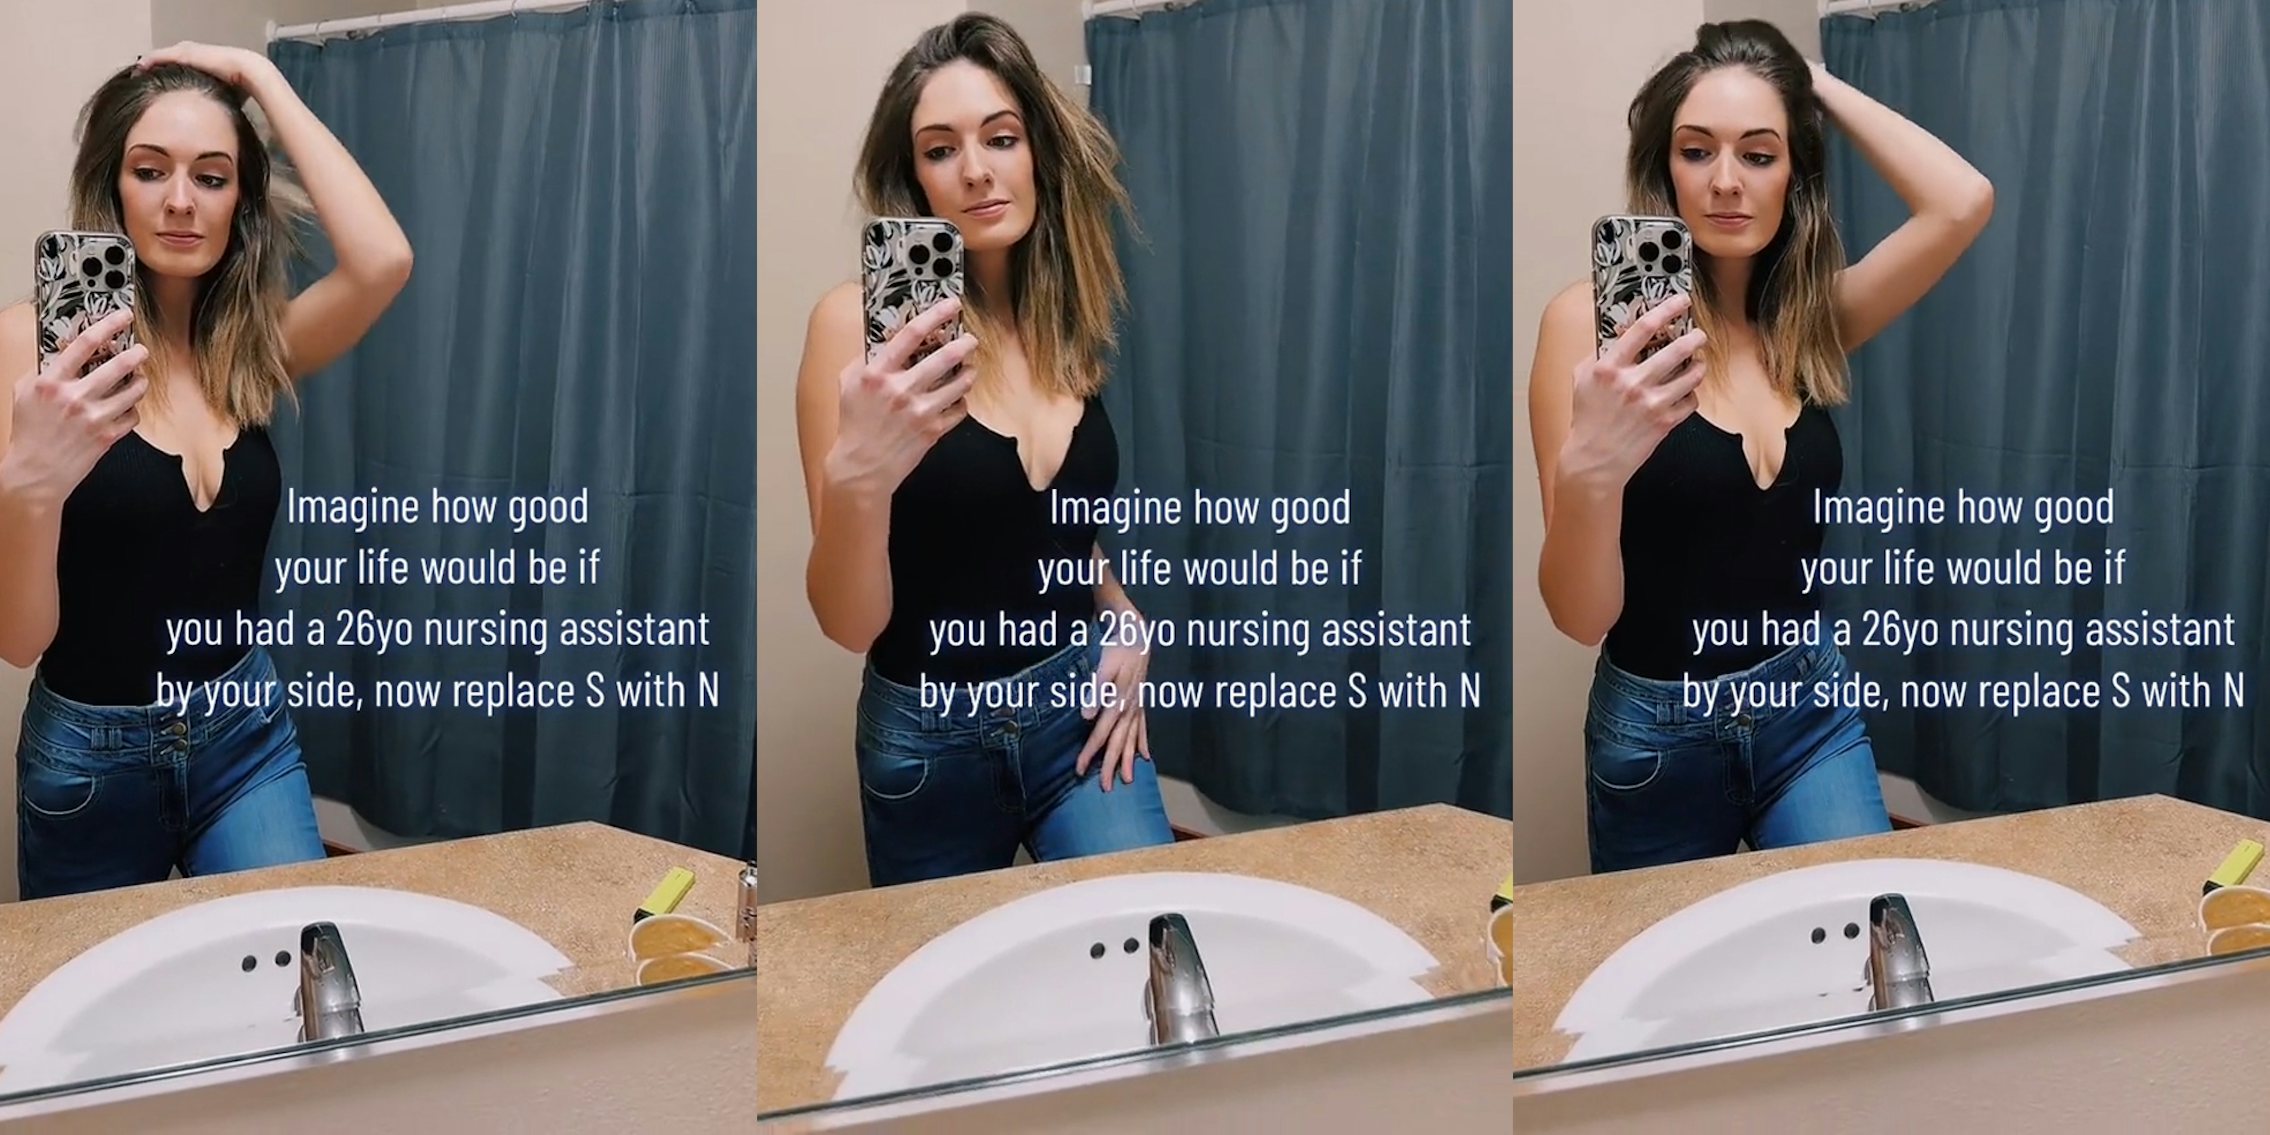 woman posing in mirror caption 'Imagine how good your life would be if you had a 26yo nursing assistant by your side, now replace S with N' (l) woman posing in mirror caption 'Imagine how good your life would be if you had a 26yo nursing assistant tiktok by your side, now replace S with N' (c) woman posing in mirror caption 'Imagine how good your life would be if you had a 26yo nursing assistant by your side, now replace S with N' (r)